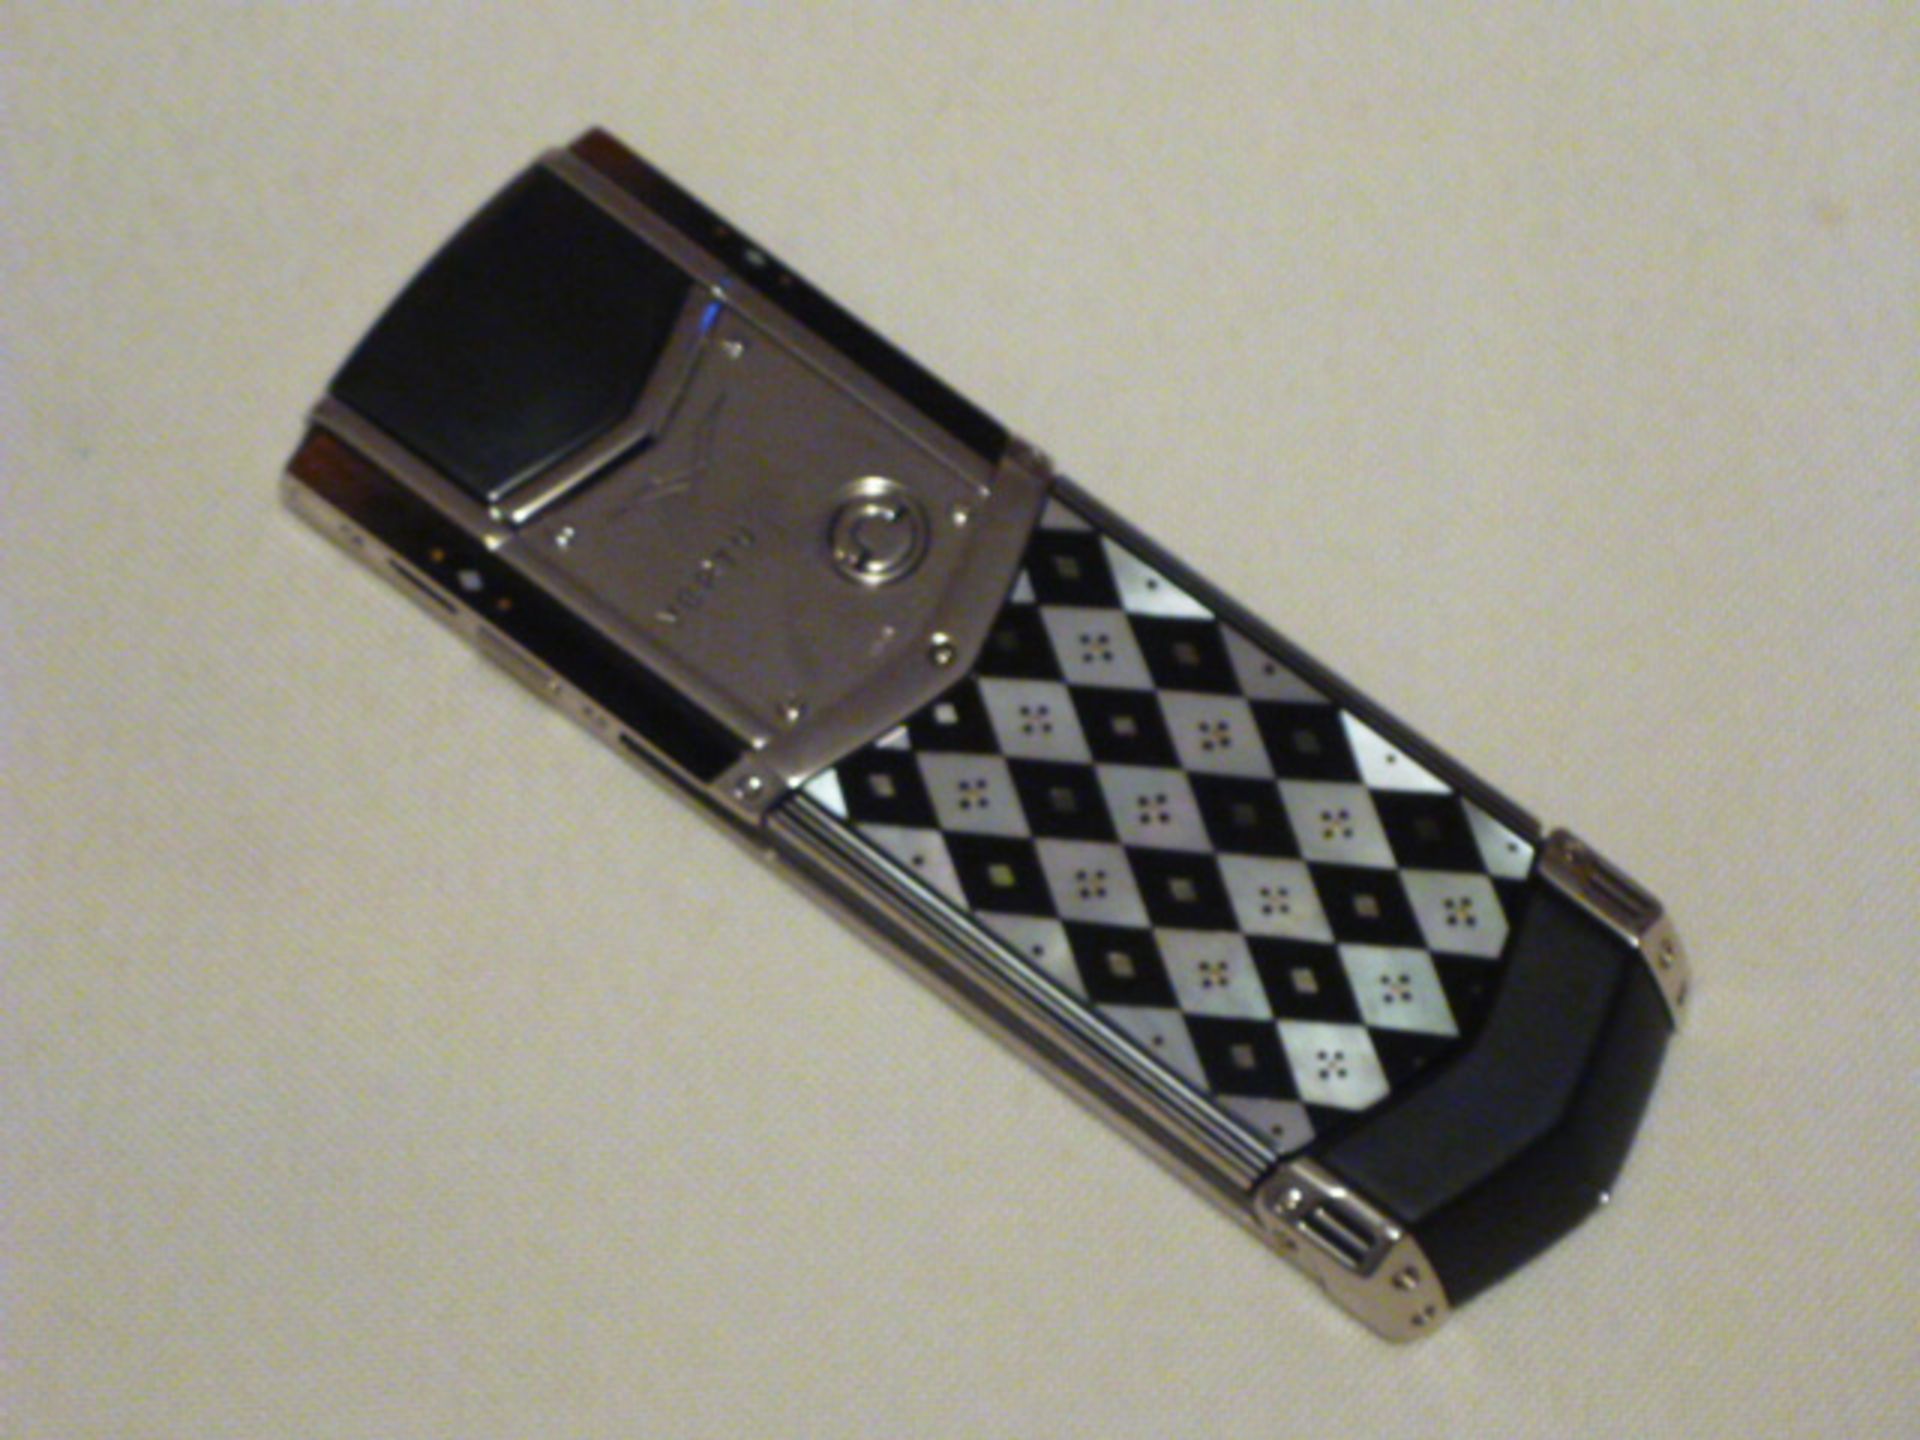 Vertu Signature Harmony Phone, Unique Design 1 of 4. This Handset has been Designed and Created - Image 4 of 6